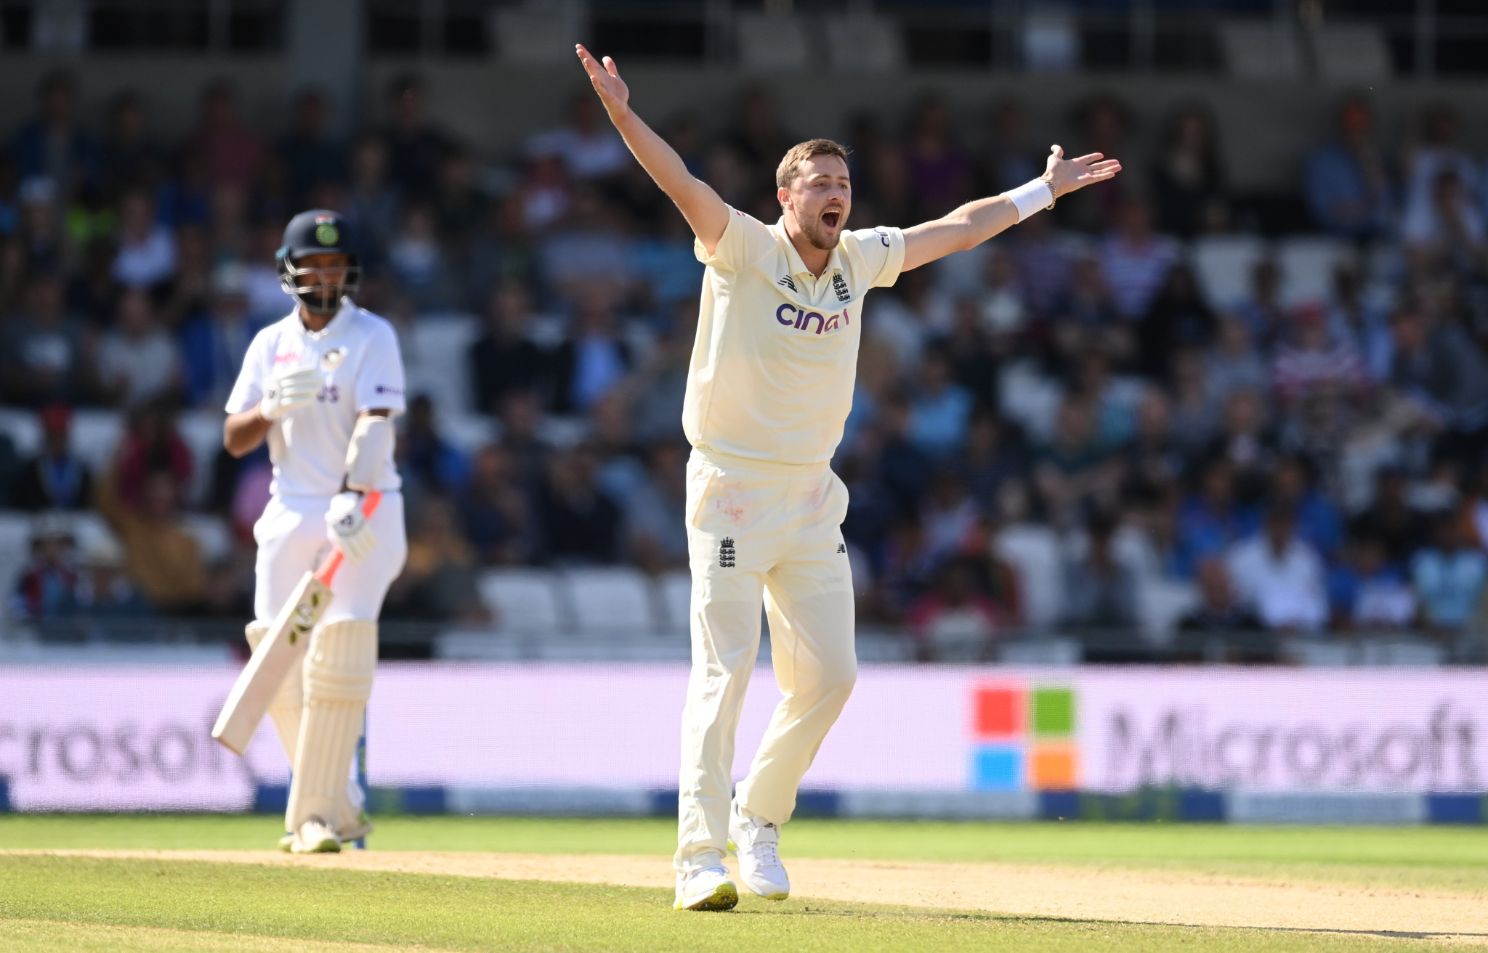 3rd Test, Day 4: England square series decimating India by an innings and 76 runs in Leeds